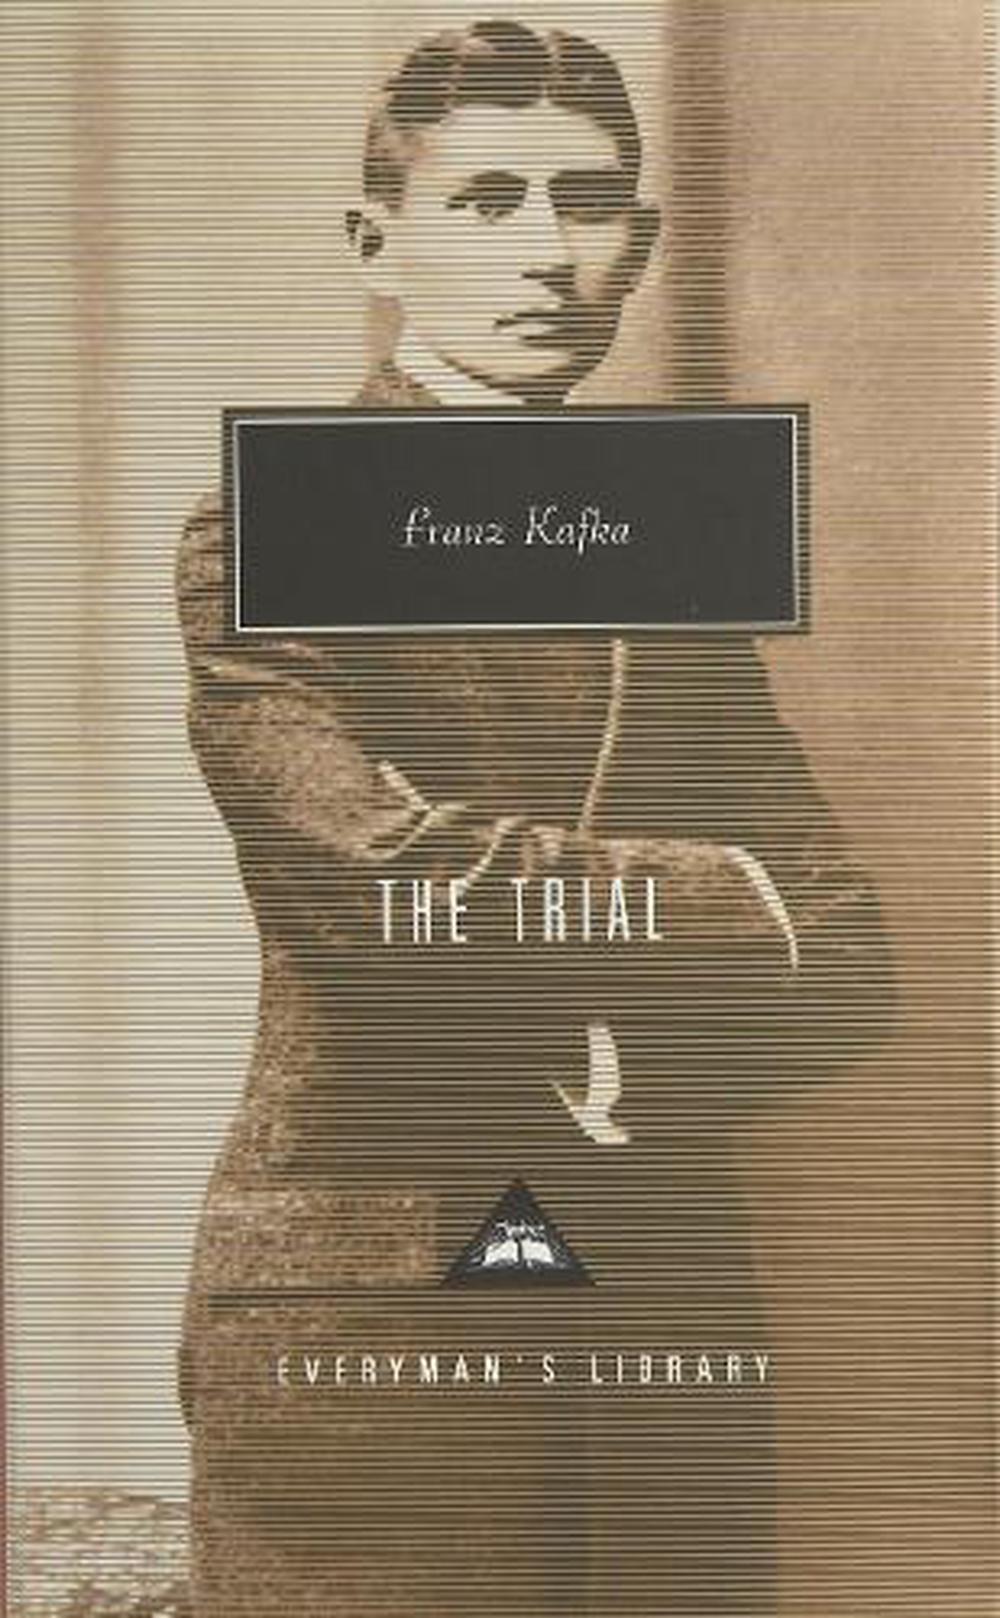 the trial kafka sparknotes